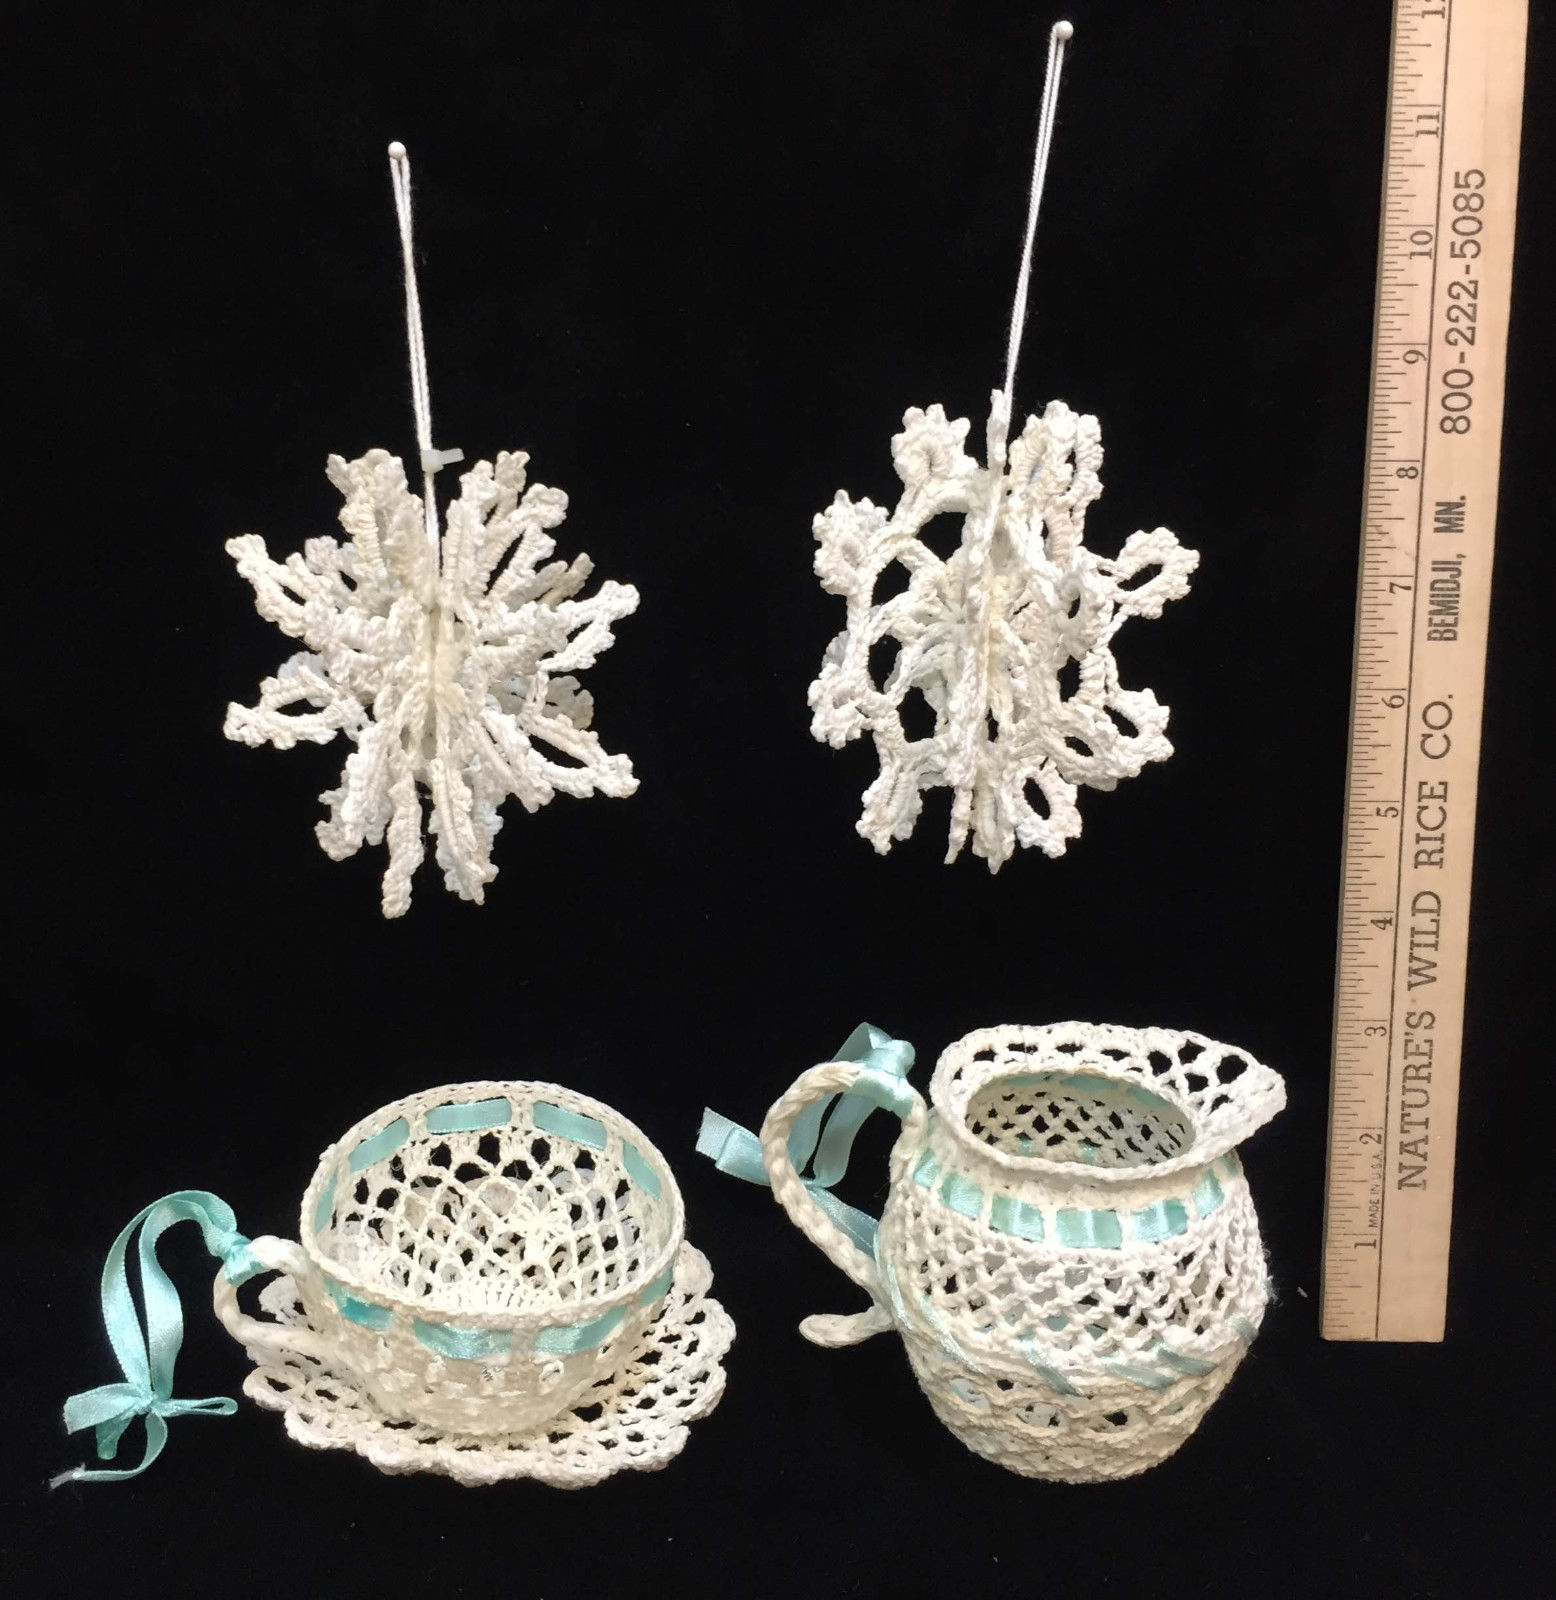 Ornaments Snowflakes Pitcher Teacup Saucer Stiff Crotcheted Lot of 4 - $9.40